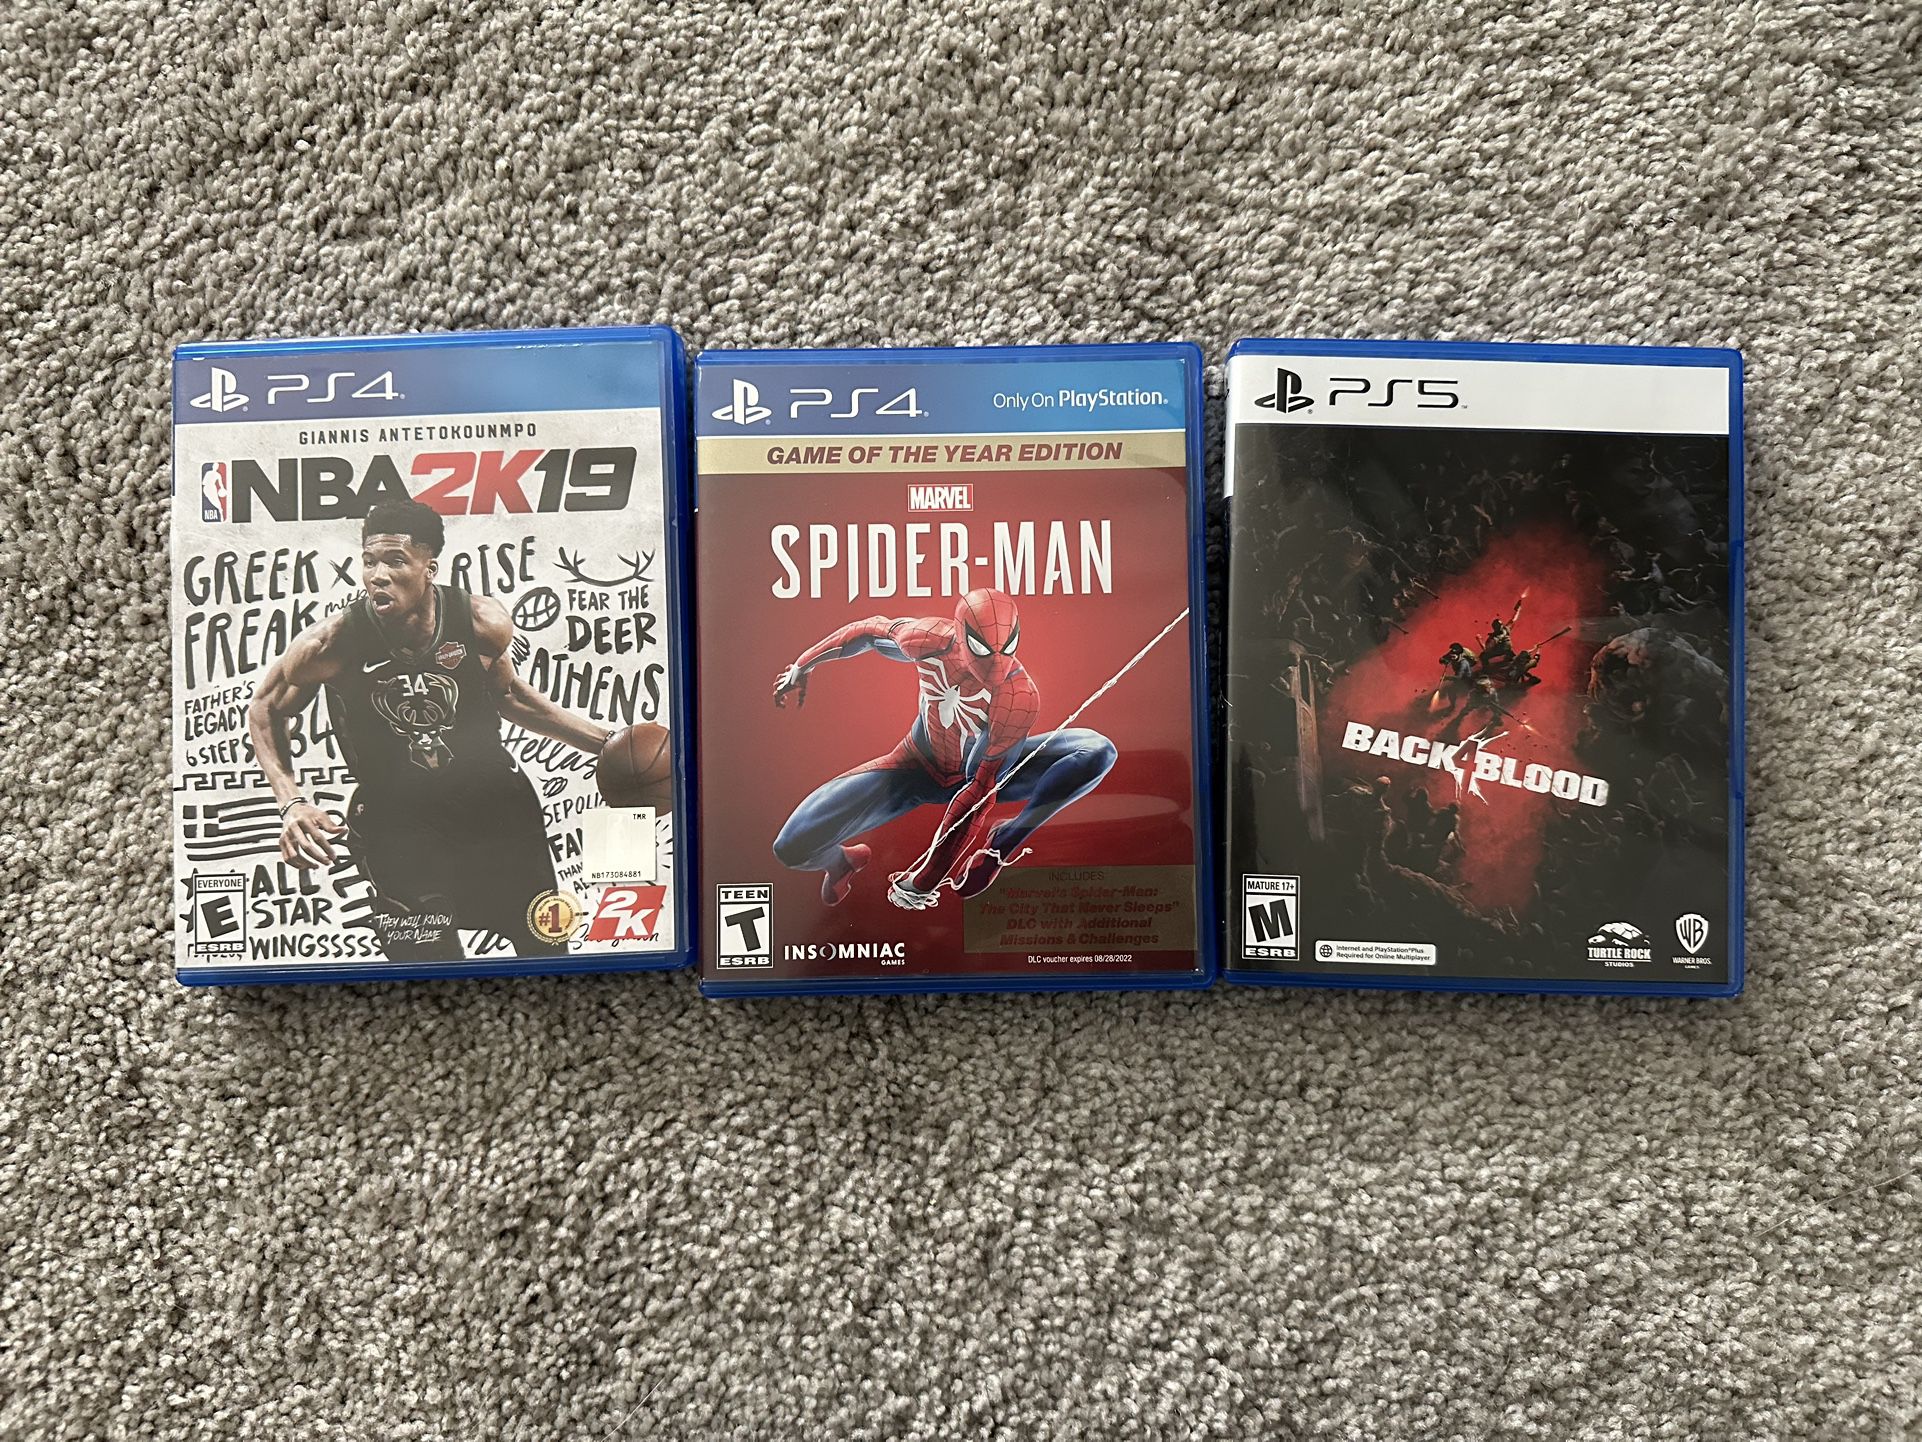 Ps5 Digital Edition for Sale in North Las Vegas, NV - OfferUp